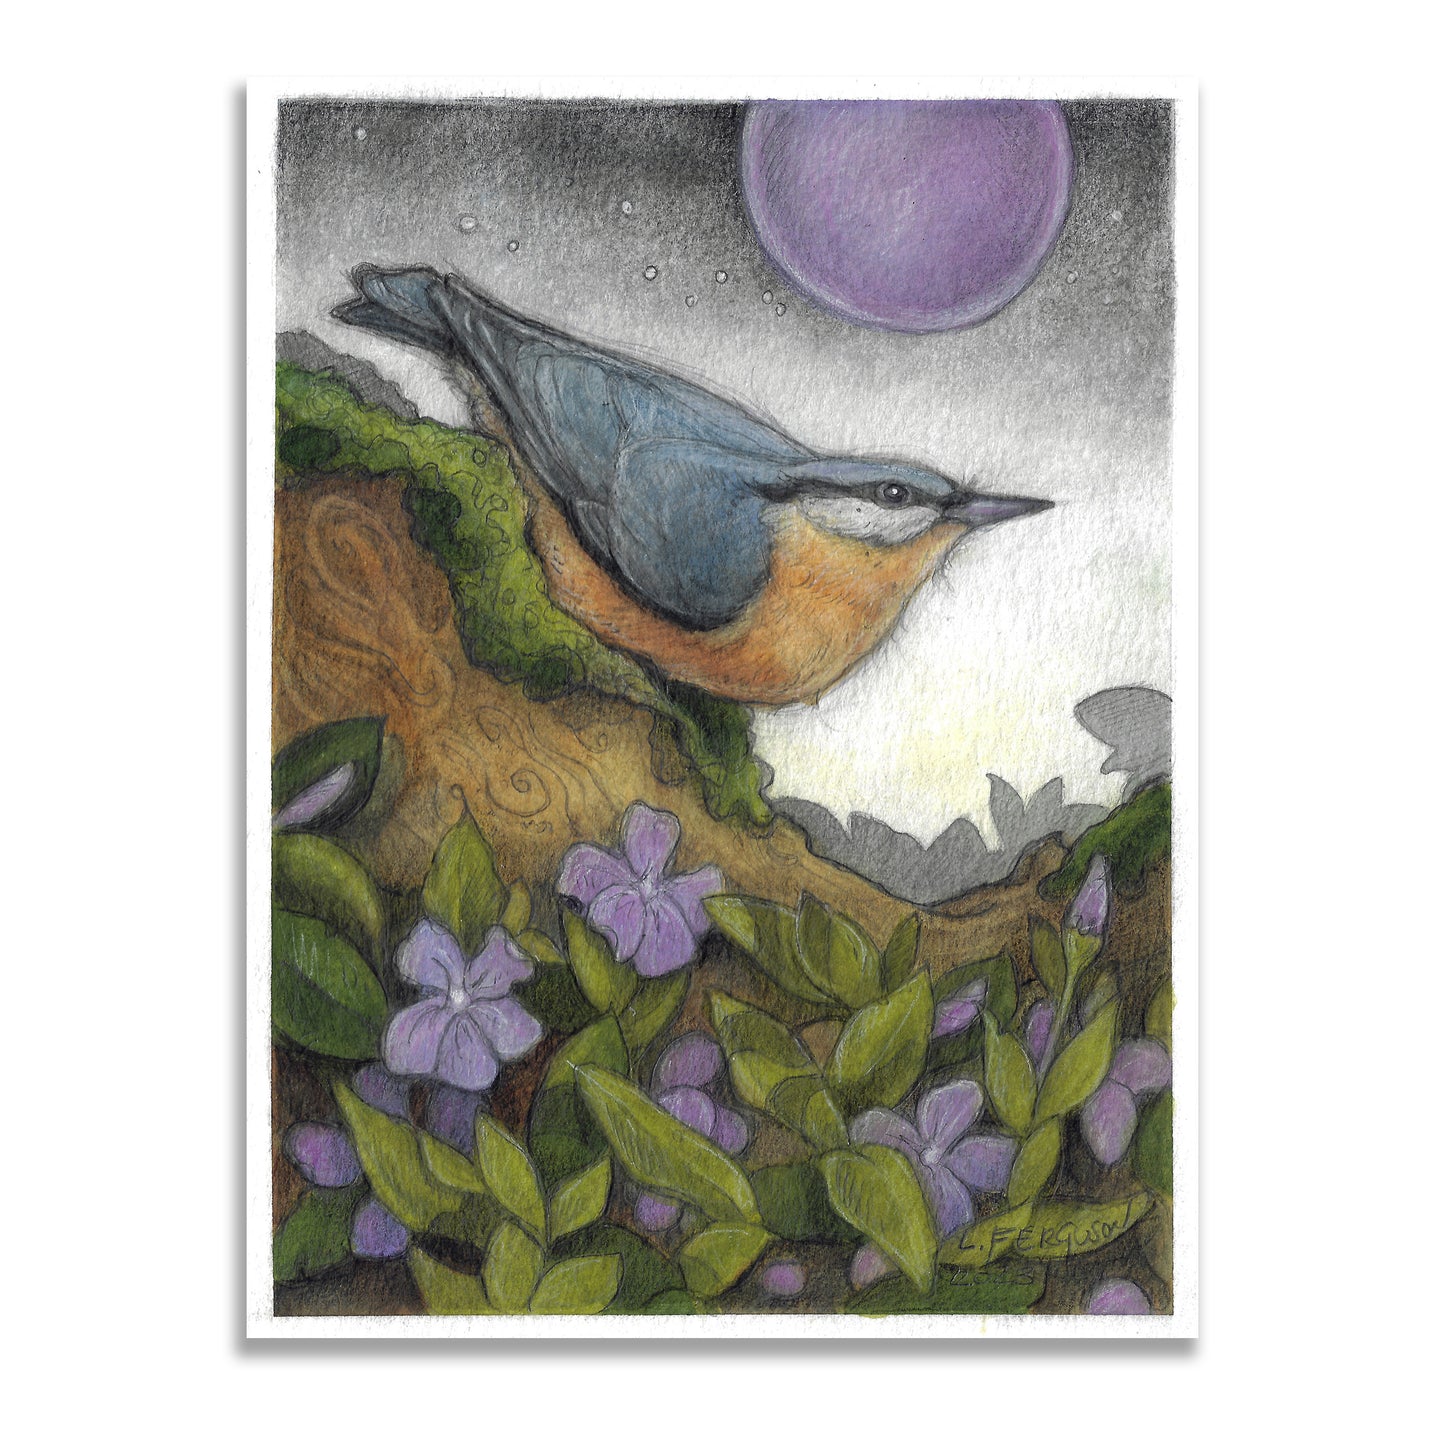 Rose Breasted Nuthatch-Original Mixed media Art